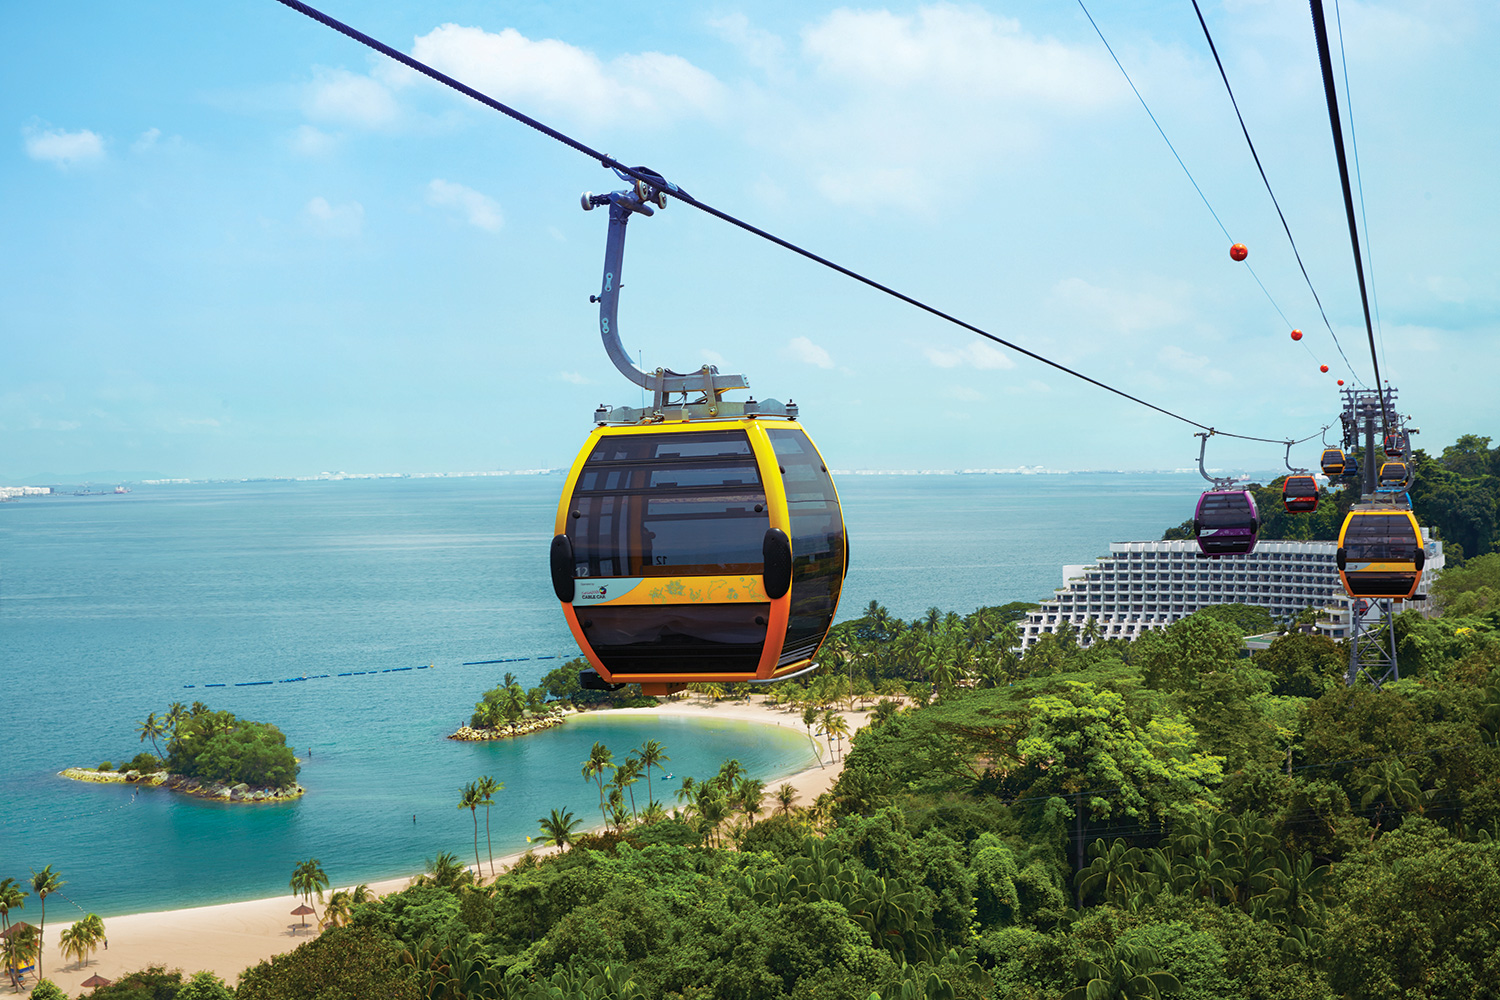 Singapore’s Iconic Cable Car Opens New Line on Sentosa Island - Darren